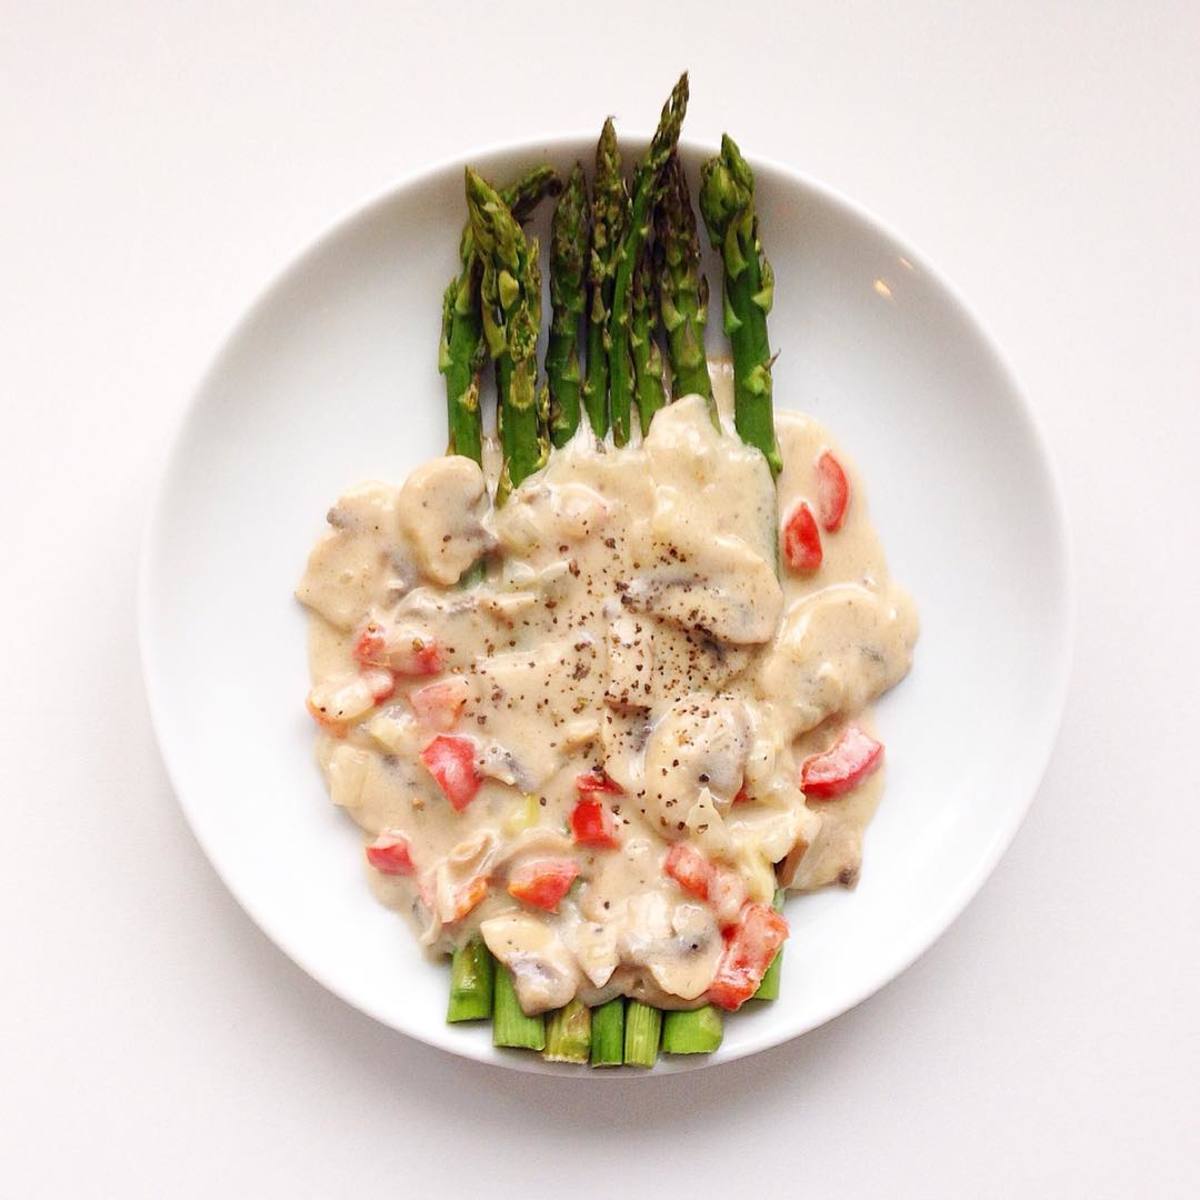 The completed dish: grilled asparagus with coconut mushroom sauce.